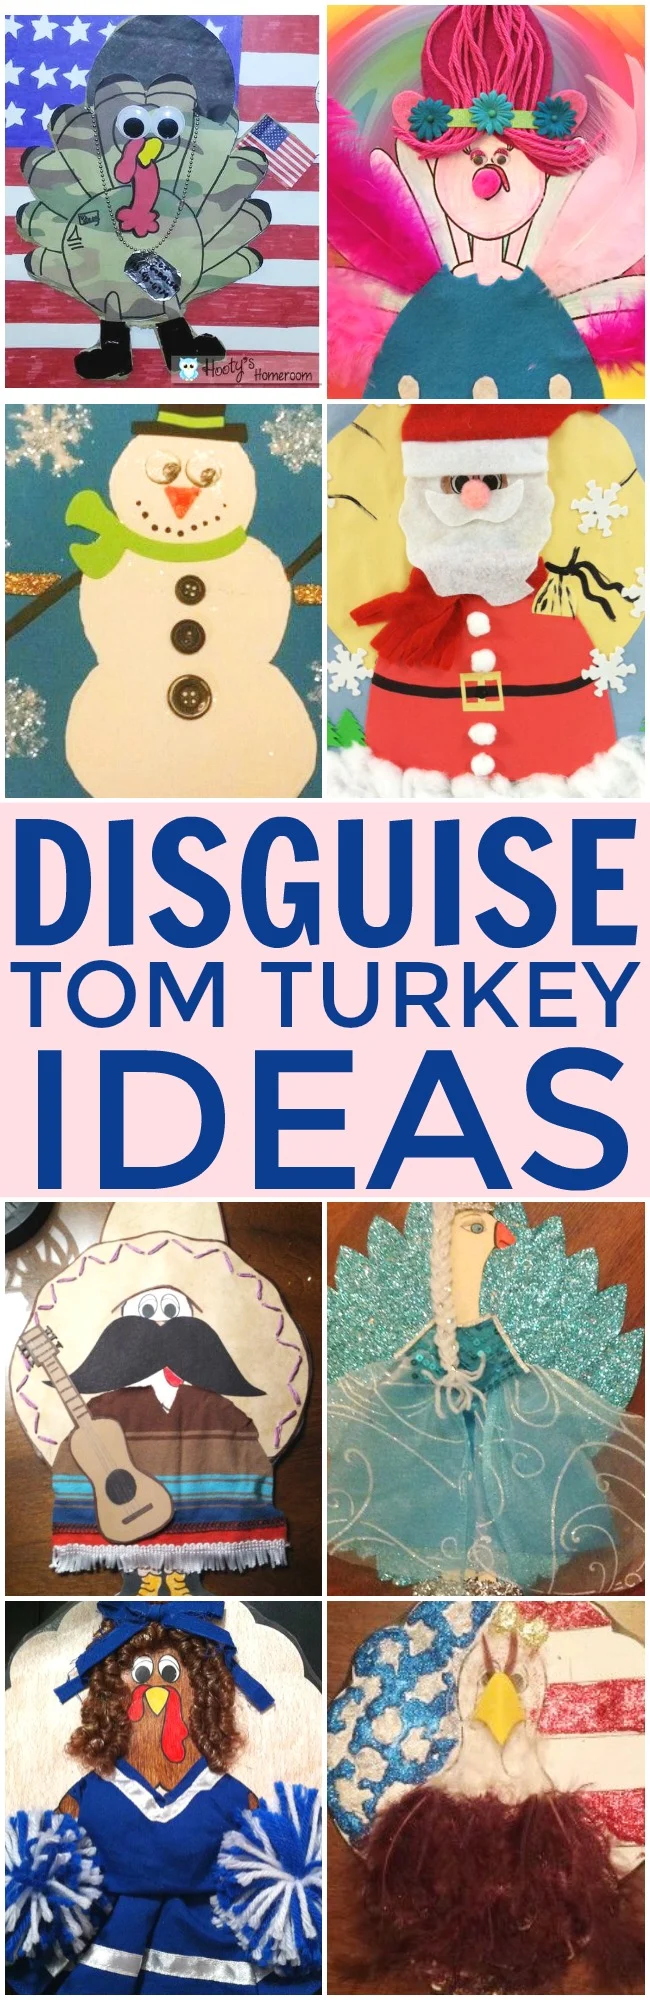 Help save Tom from getting eaten this Thanksgiving with these fun ideas to disguise Tom turkey. A great imaginative craft for the whole family.